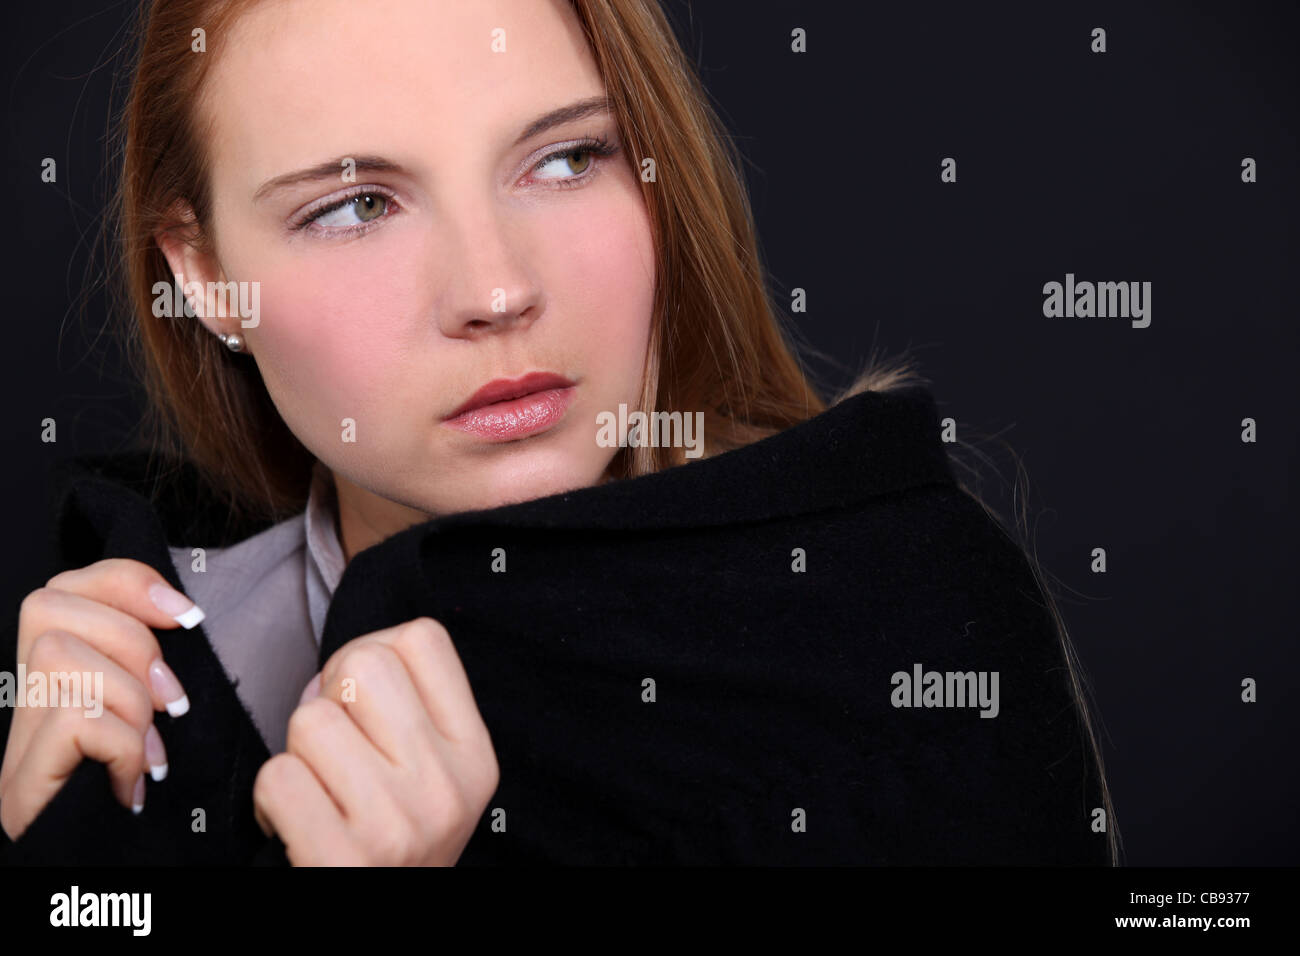 portrait of beautiful girl with side look Stock Photo - Alamy